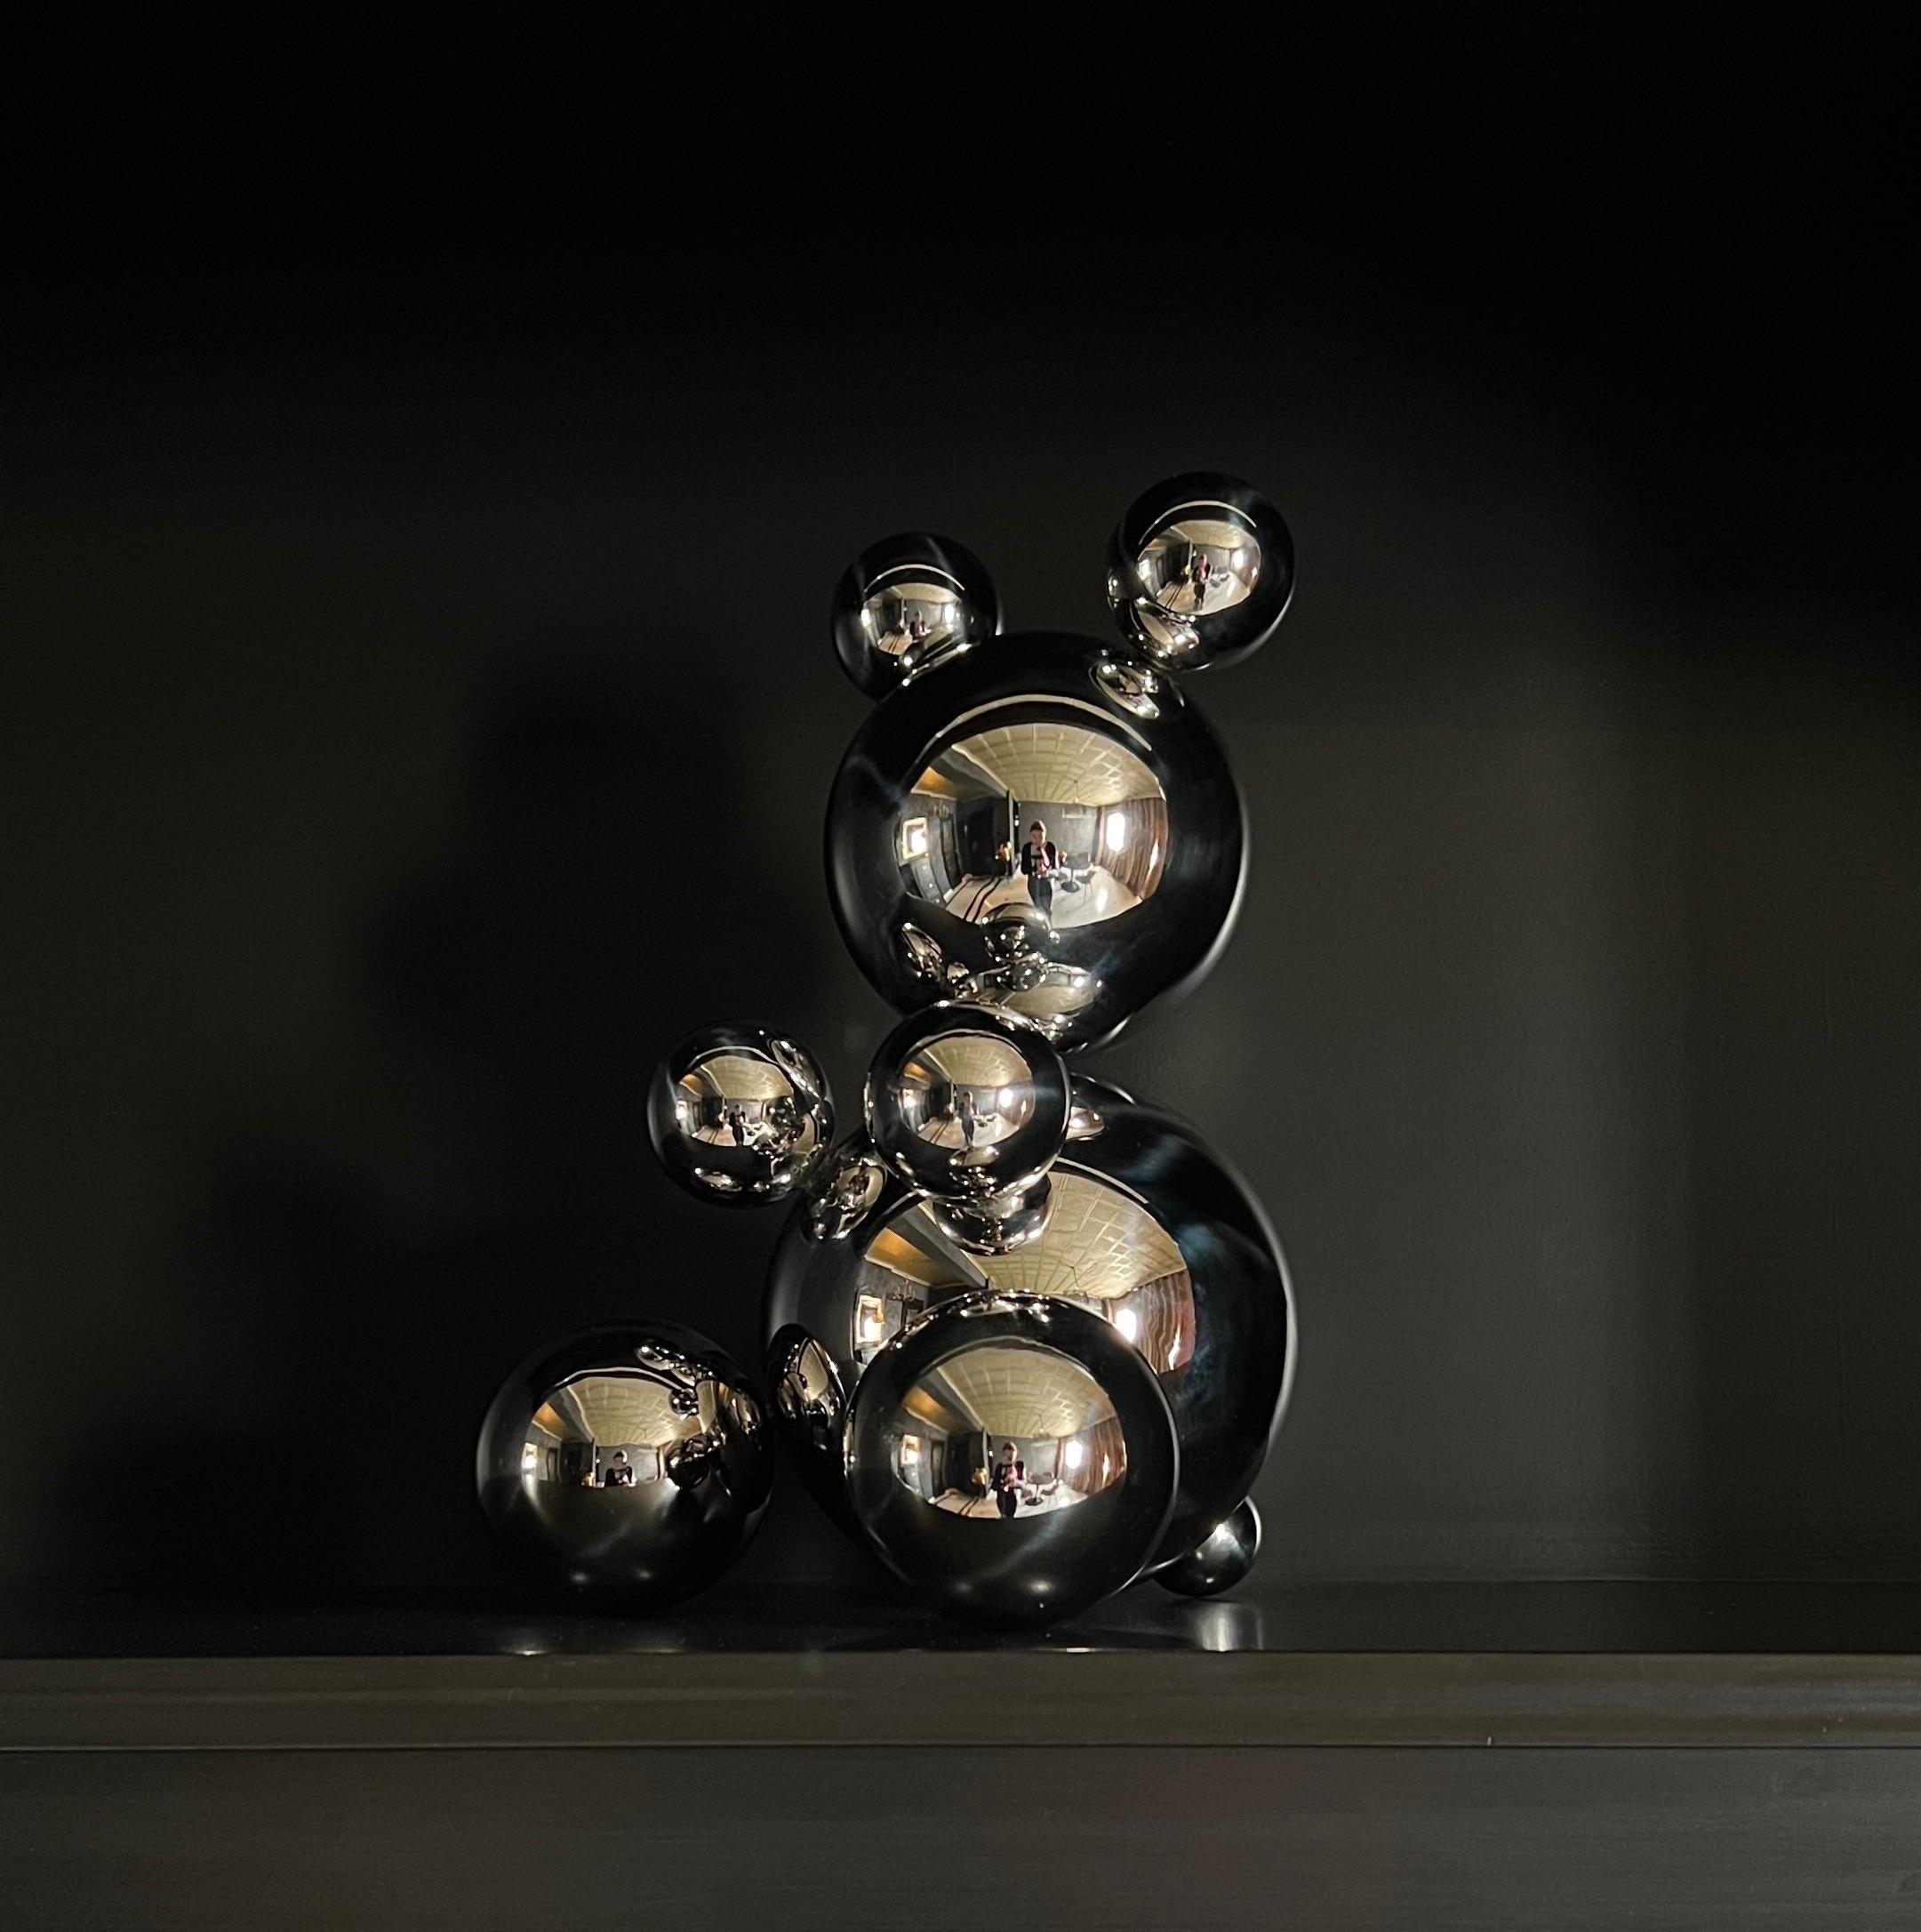 Middle Stainless Steel Bear 'Oliver' Sculpture Minimalistic Animal 4